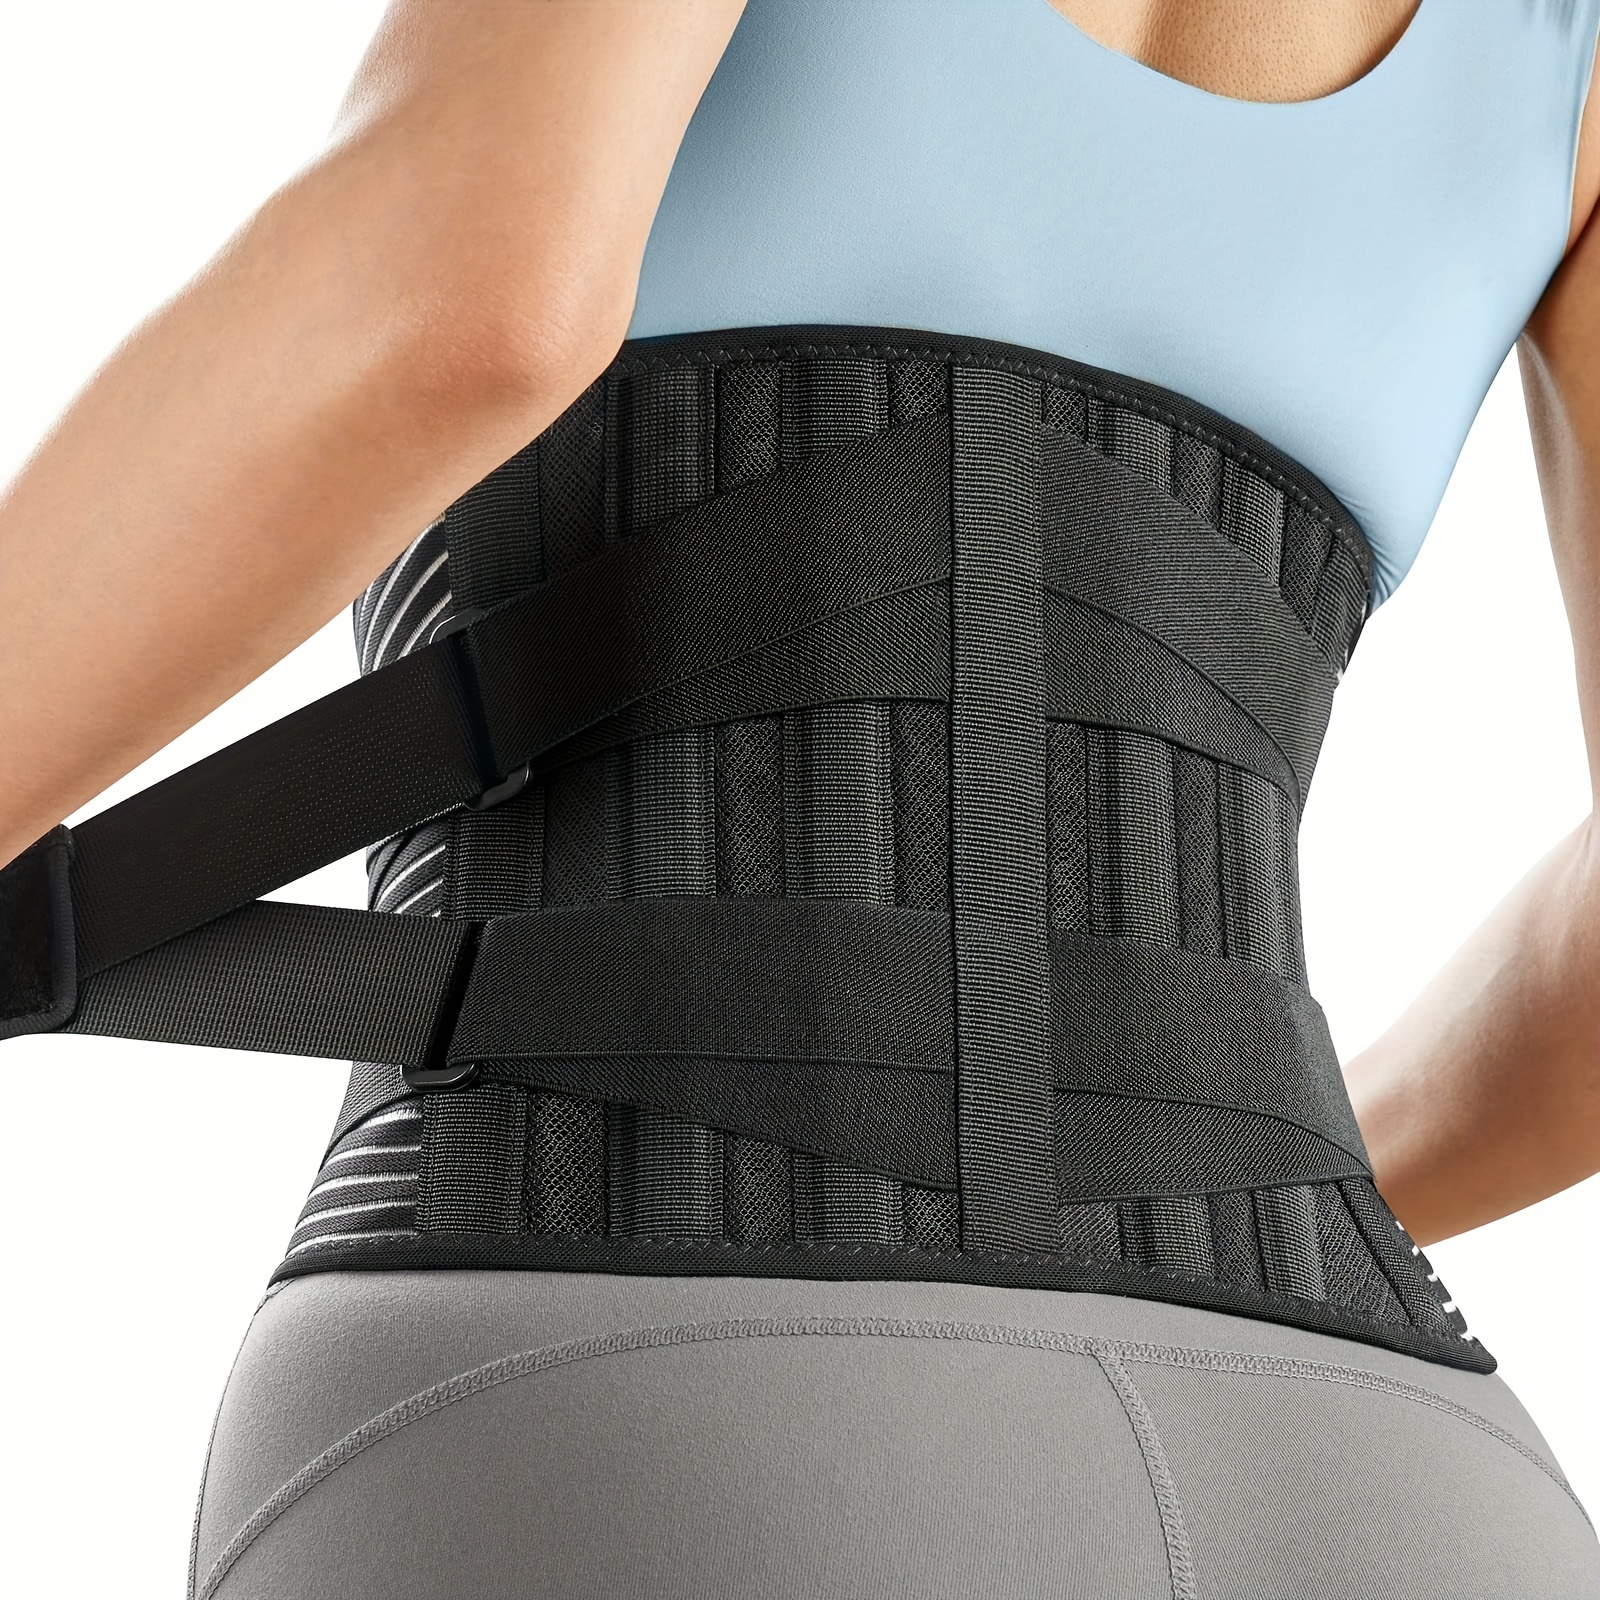 Unisex Back Support With Adjustable Support Straps For Back Pain